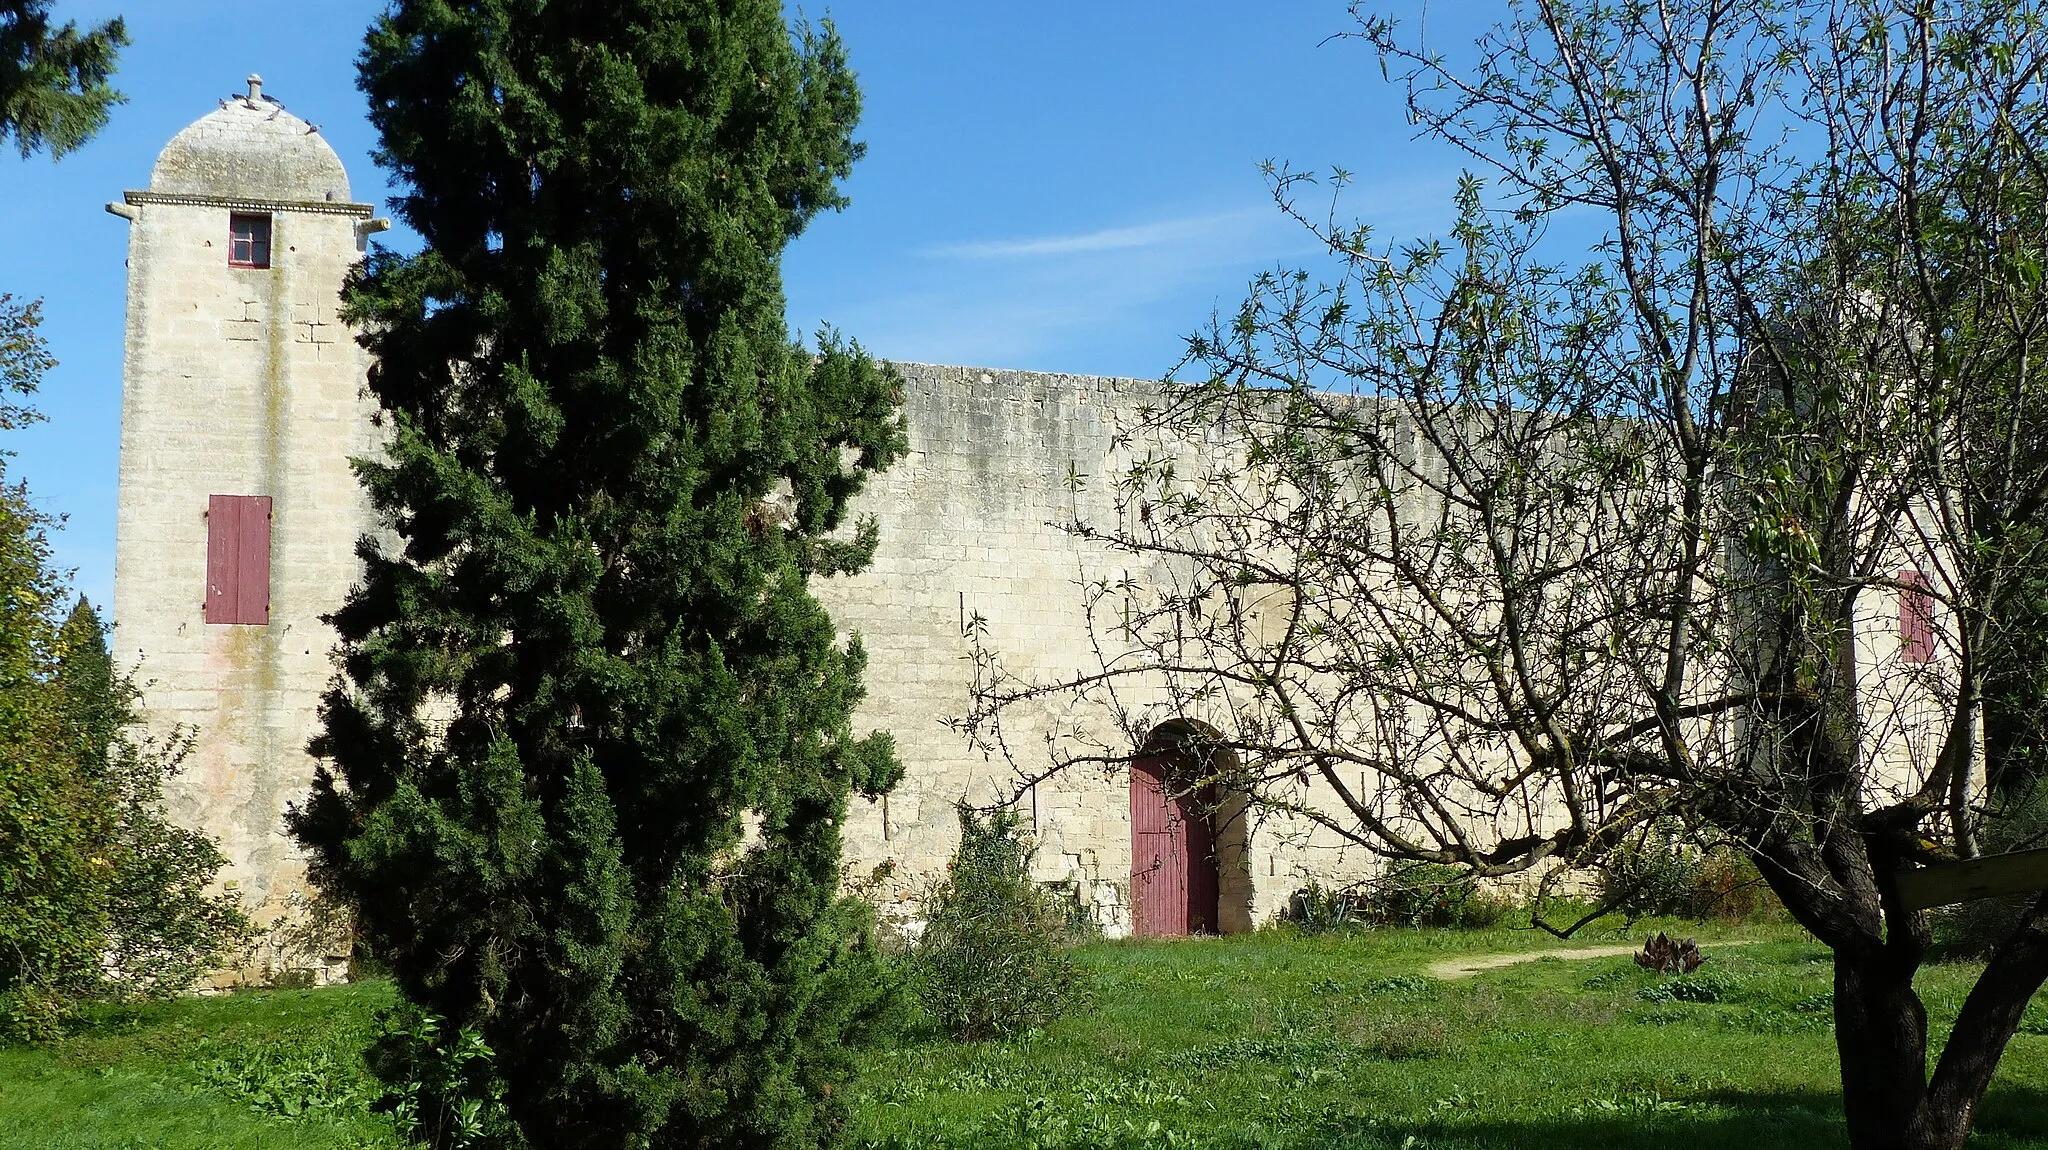 Photo showing: Fourques (Gard, Occitanie, France), originally a medieval castle but much later reworked and belonging to the Boissy d'Anglas family since 1810.